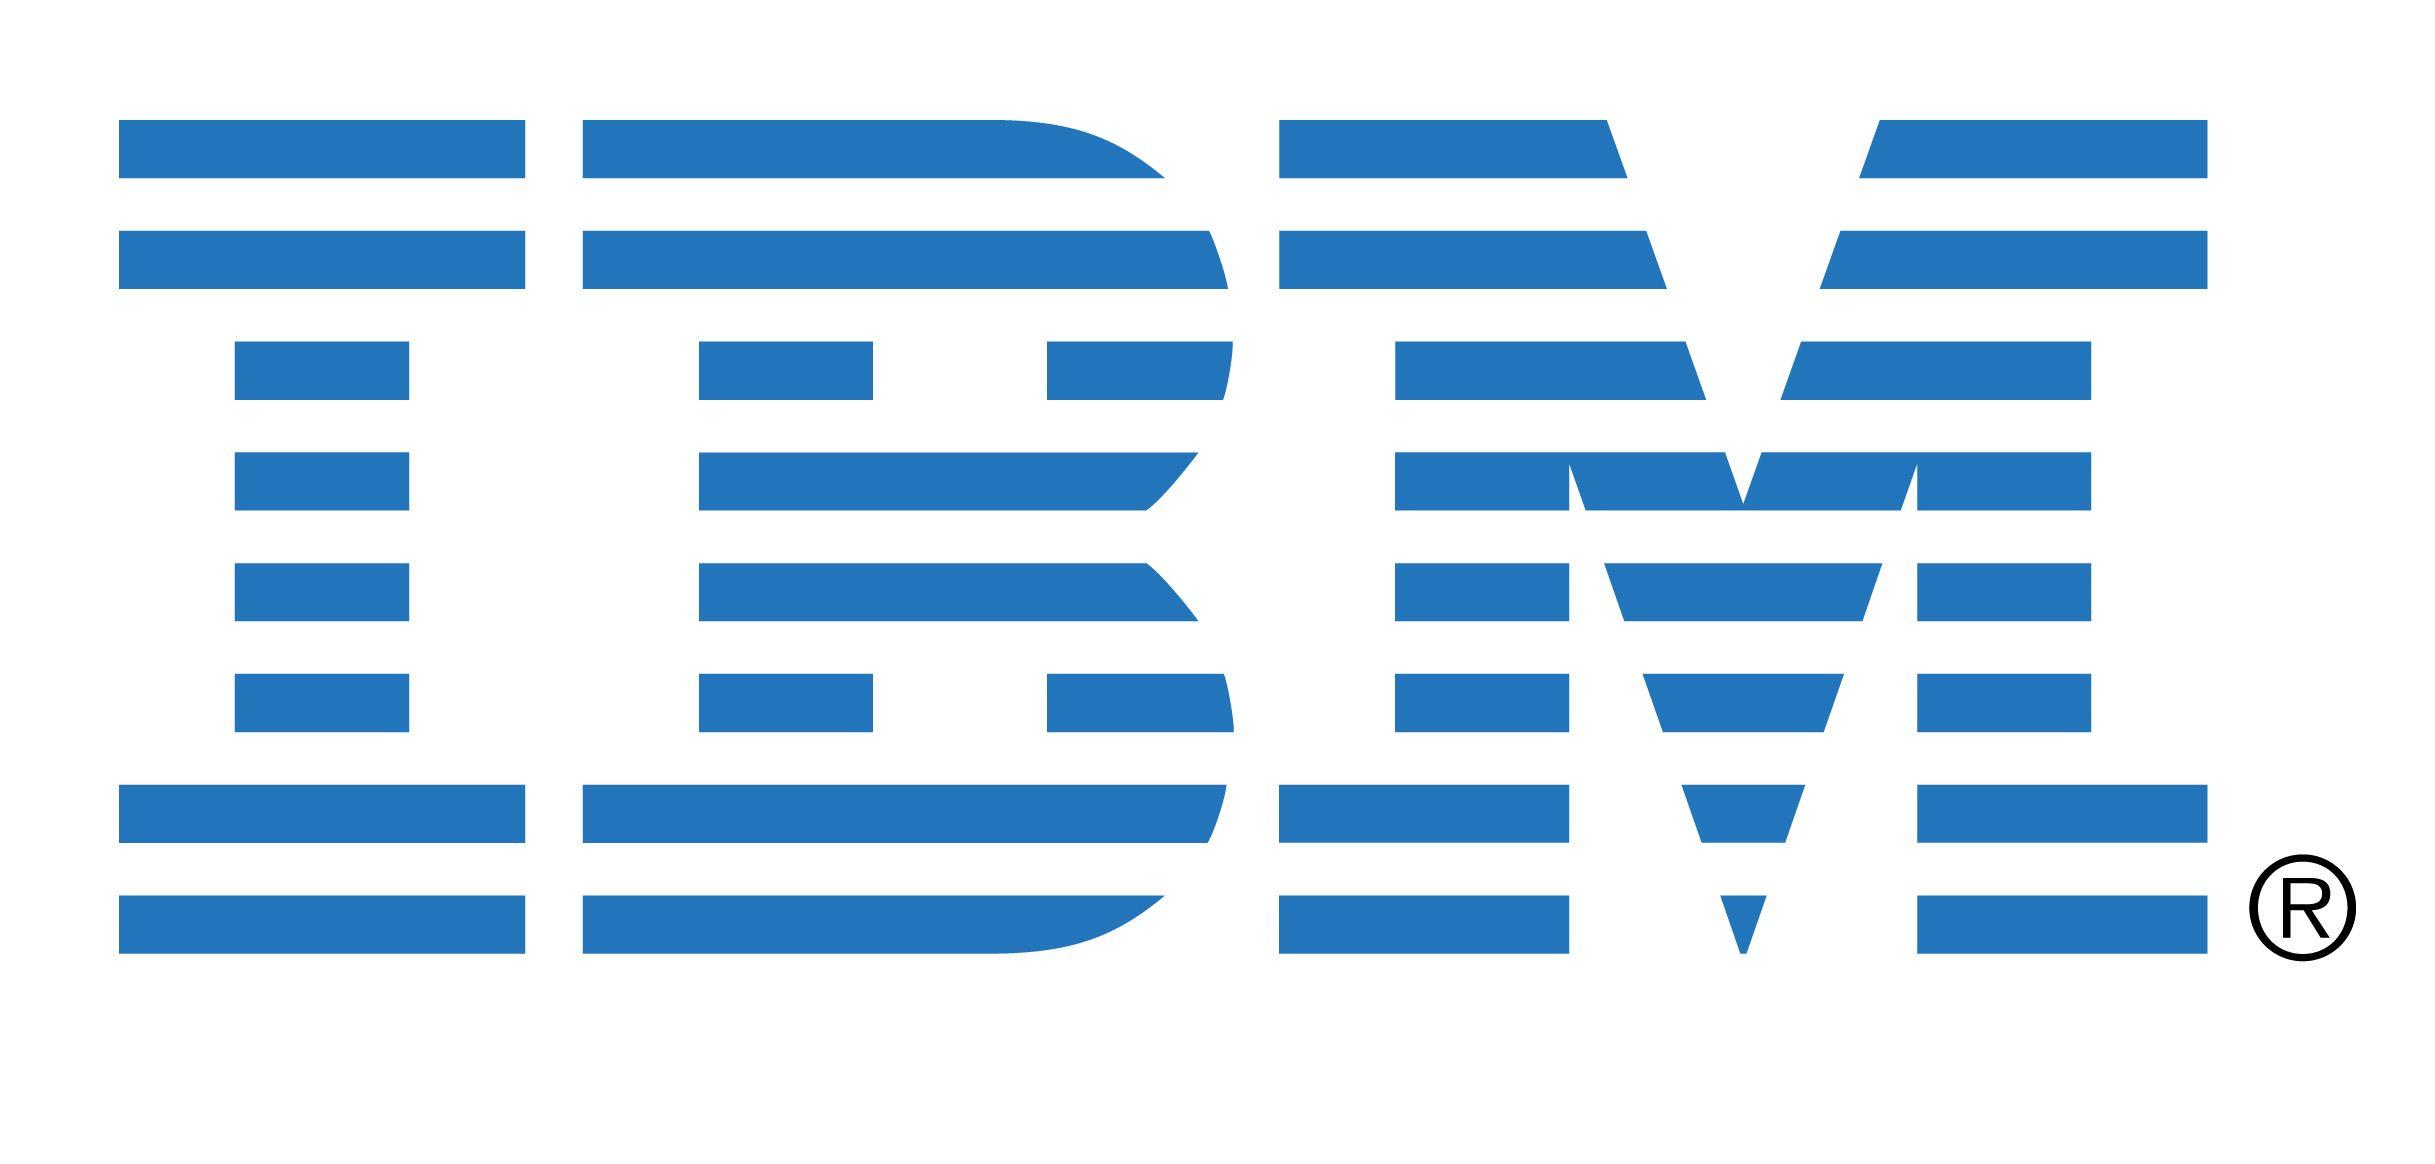 Official IBM Logo - IBM Ships Malware Infected USB Drives by Mistake - Ophtek